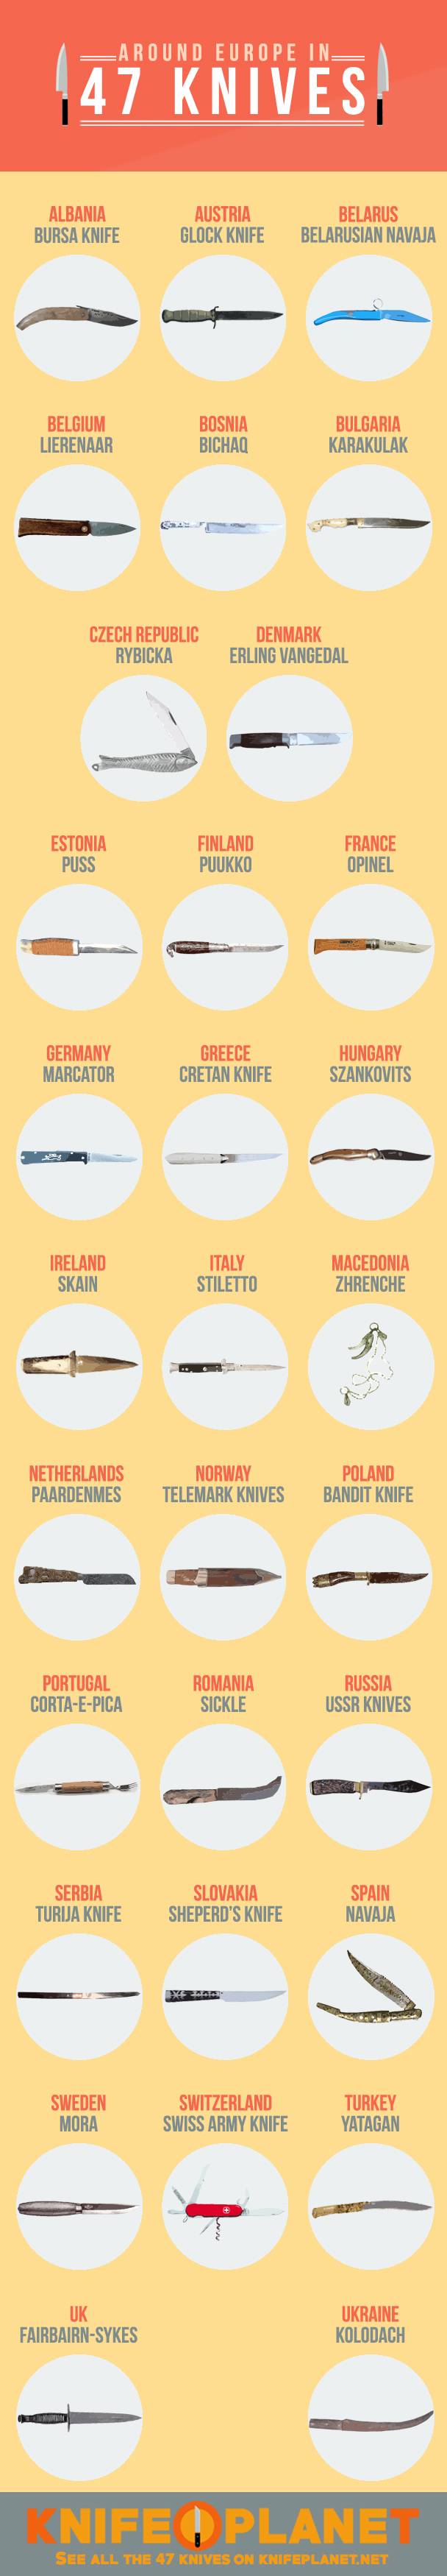 knives-europe-infographics